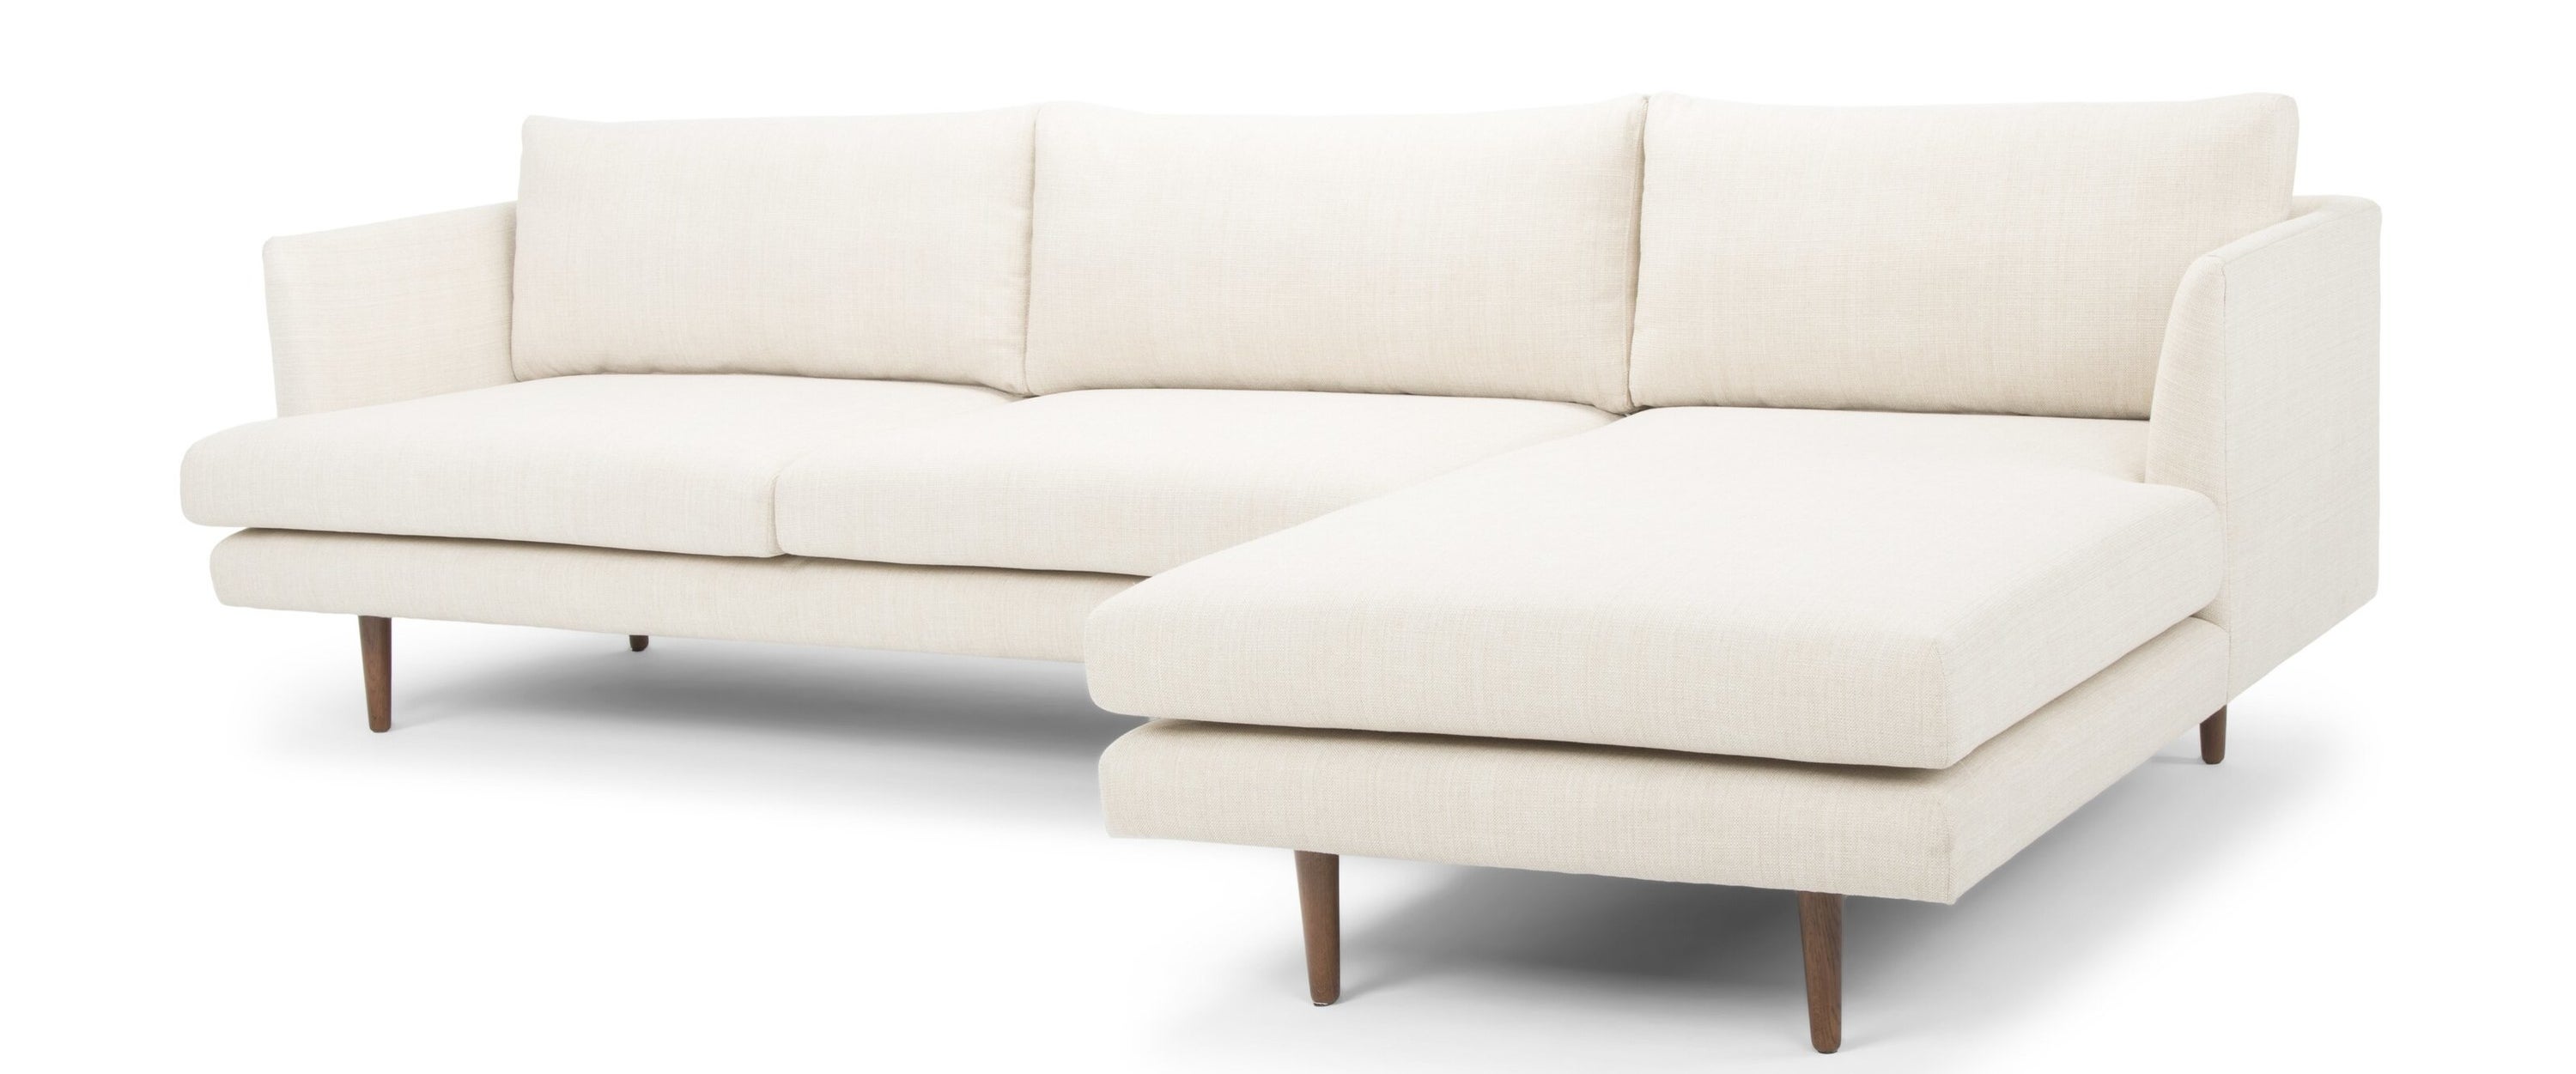 The MCM cream-colored cozy couch